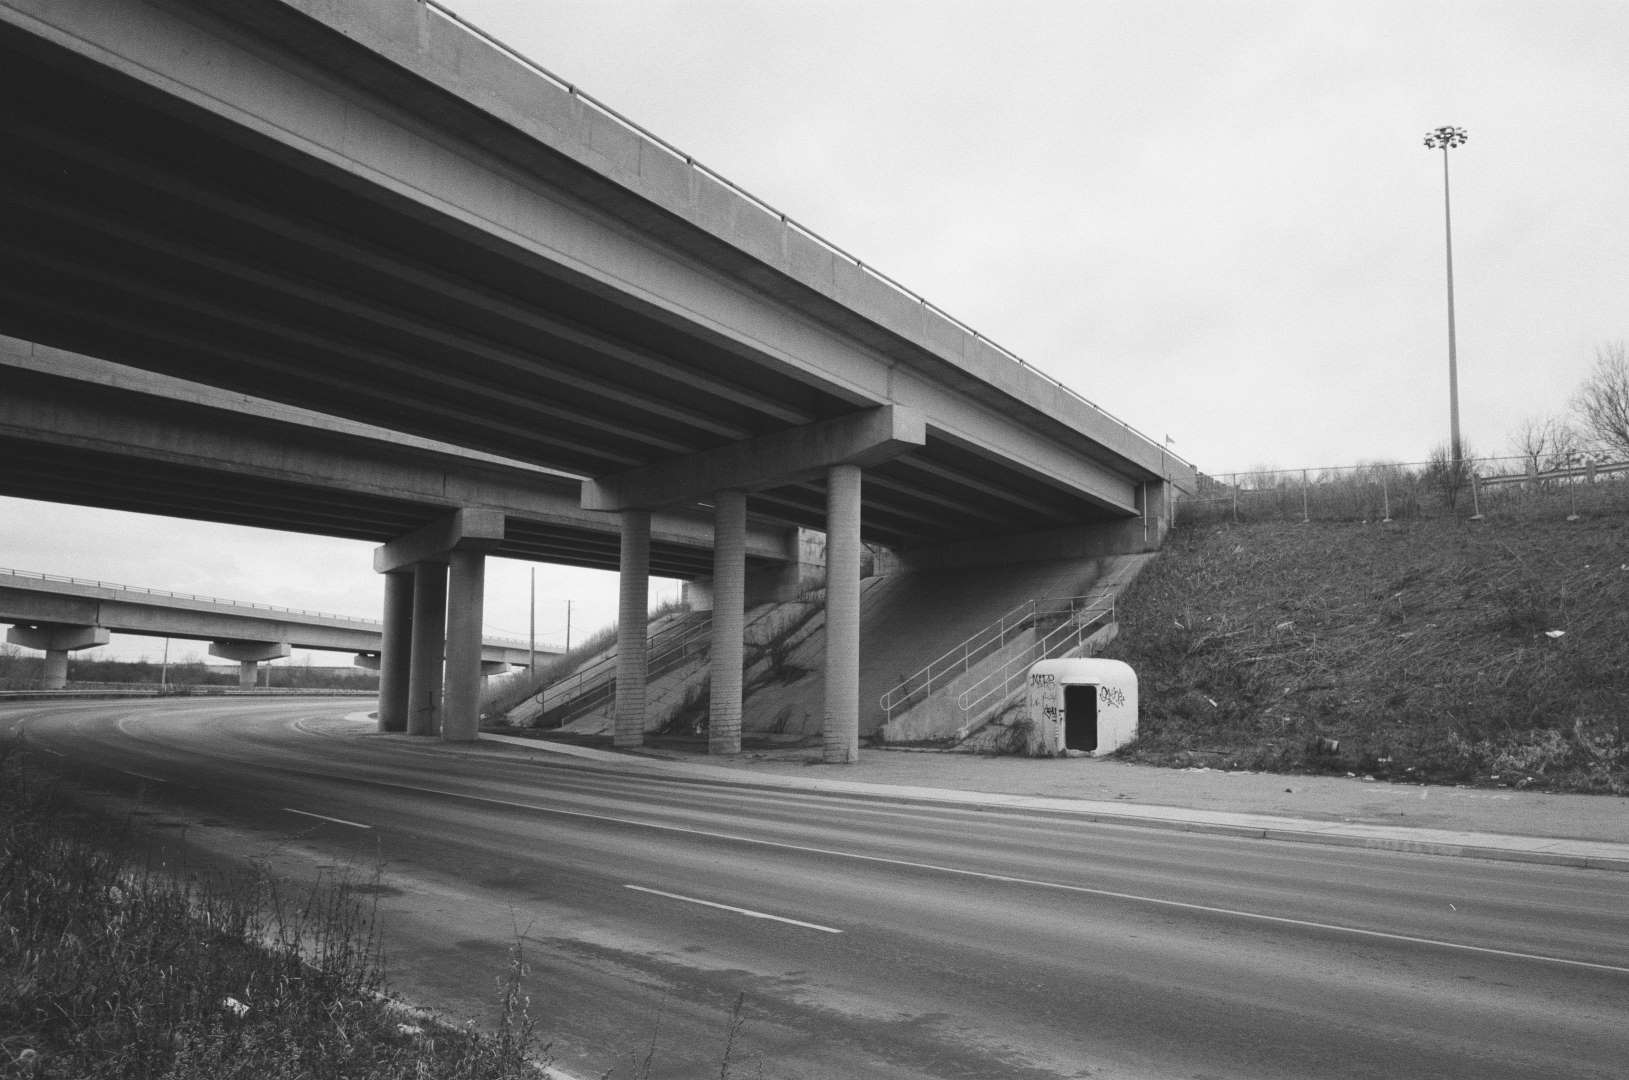 A black & white photograph of a mysterious hut underneith a highway underpass